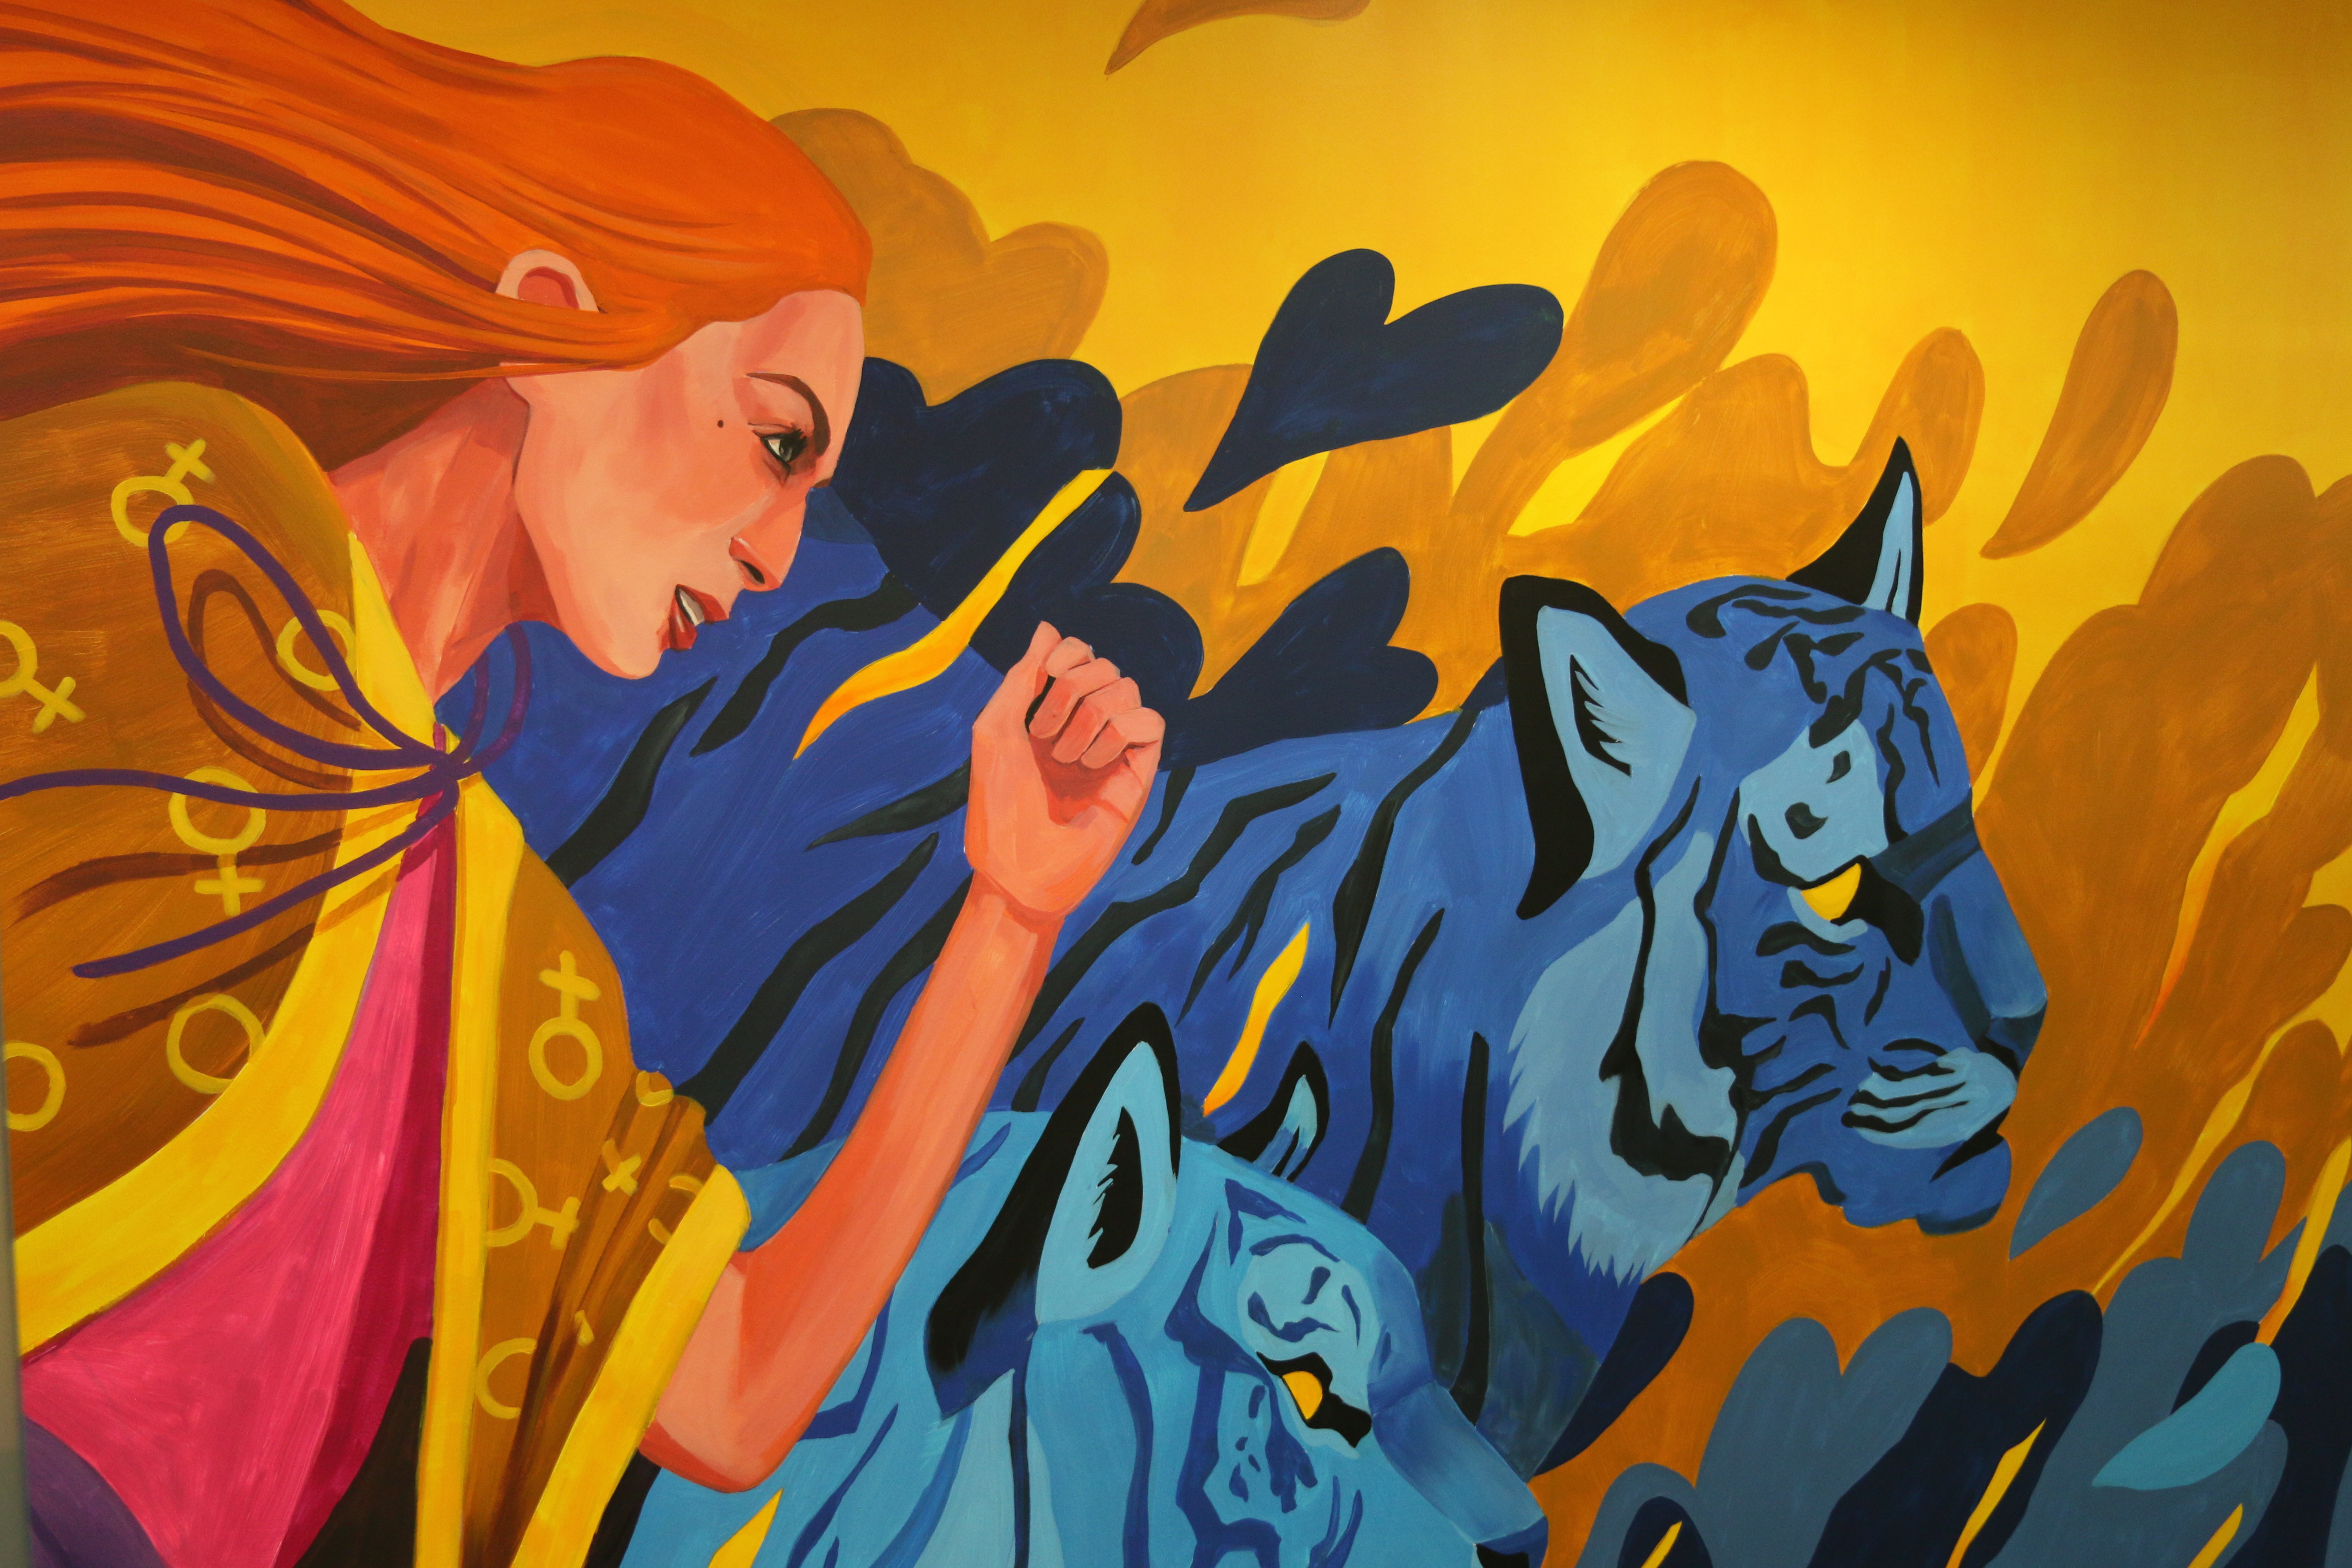 Mural illustrating a strong woman figure accompanied by tigers - one of the fiercest animals on earth - rushing towards an equal world, illustrated by Nataša Konjević. Photo: UN Women